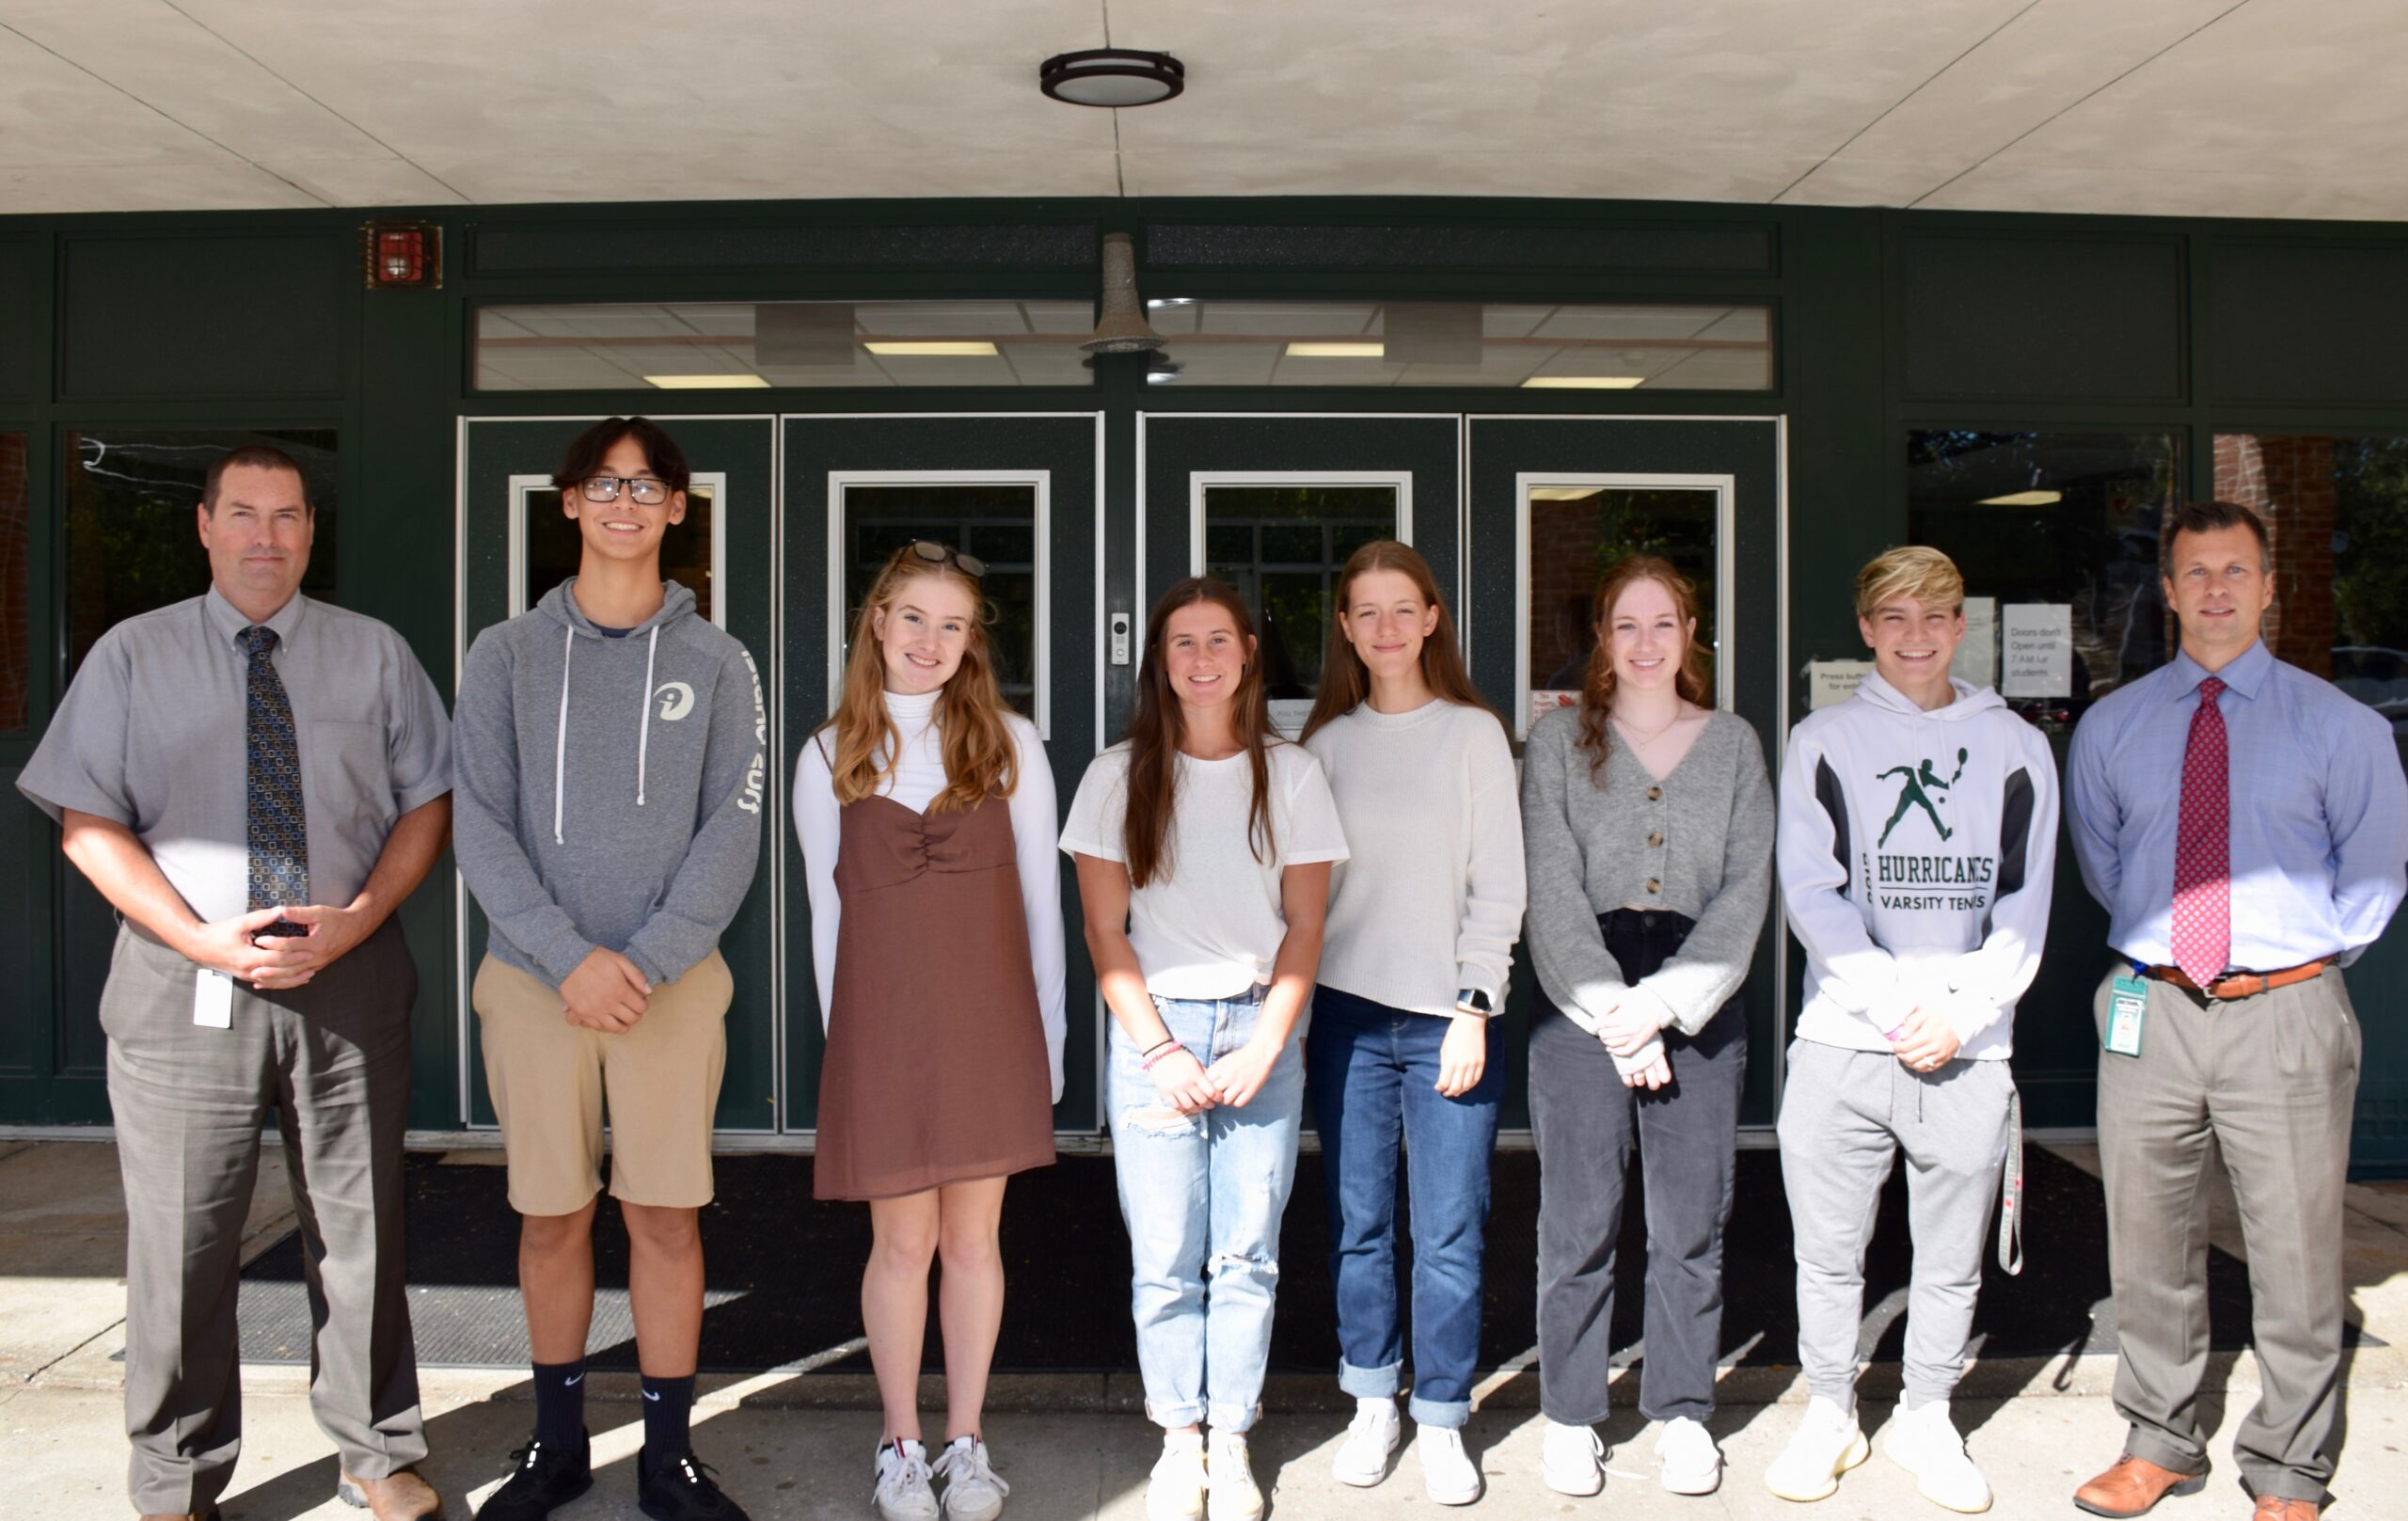 Seven Westhampton Beach High School students, Daniel Gosnell, Julia
Greiner, McKenna Heaney, Samantha Schaumloffel, Megan Sitzmann, Emily Tully and Gavin Vander Schaaf have earned New York State Scholarships for Academic Excellence.
The students qualified for the scholarships based on their exceptional GPAs and Regents test scores. The scholarships can be used toward a New York State institution of higher education. COURTESY WESTHAMPTON BEACH SCHOOL DISTRICT